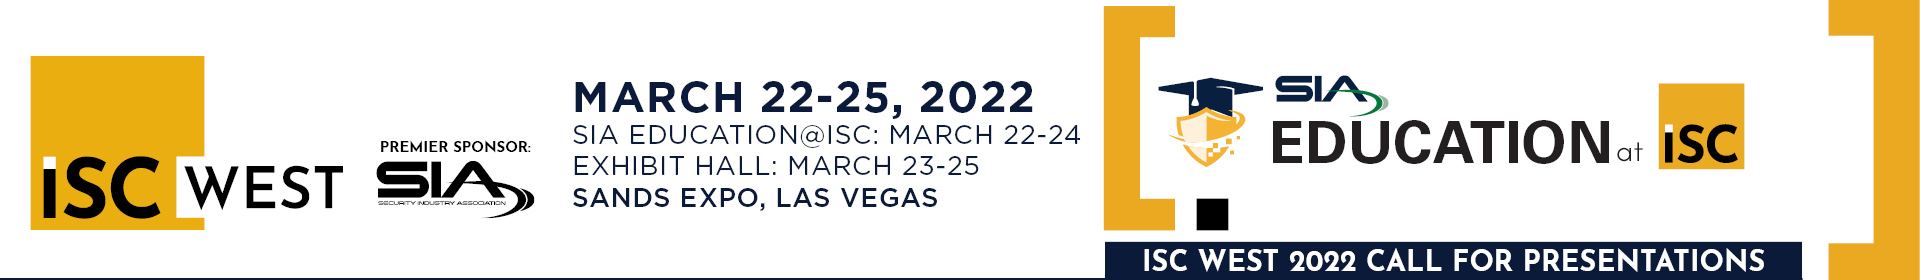 ISC West 2022 Event Banner